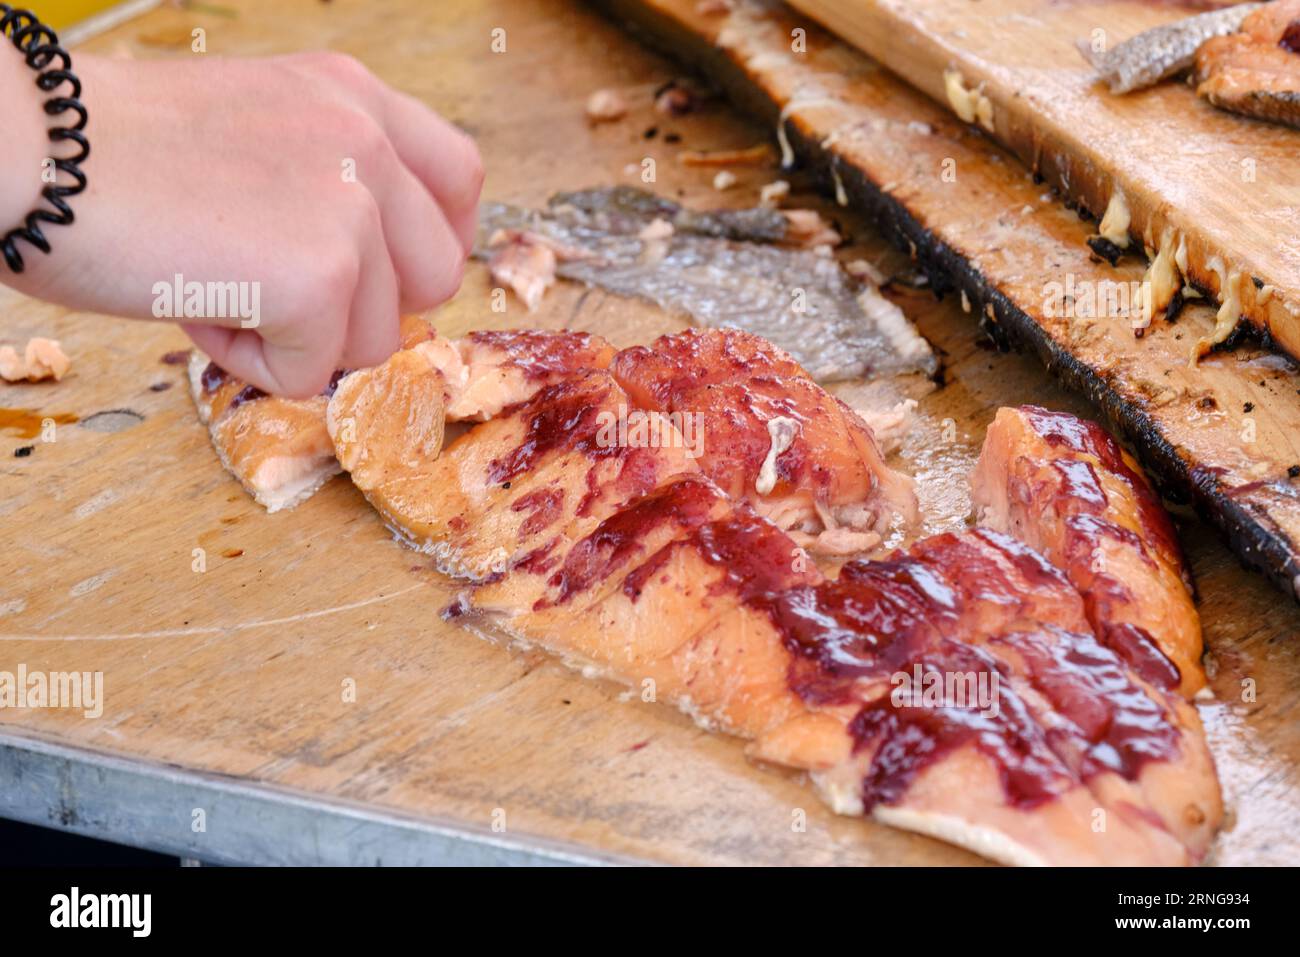 Hand eating Traditional Indigenous prepartation of salmon filet with maple sauce and berry sauce Stock Photo